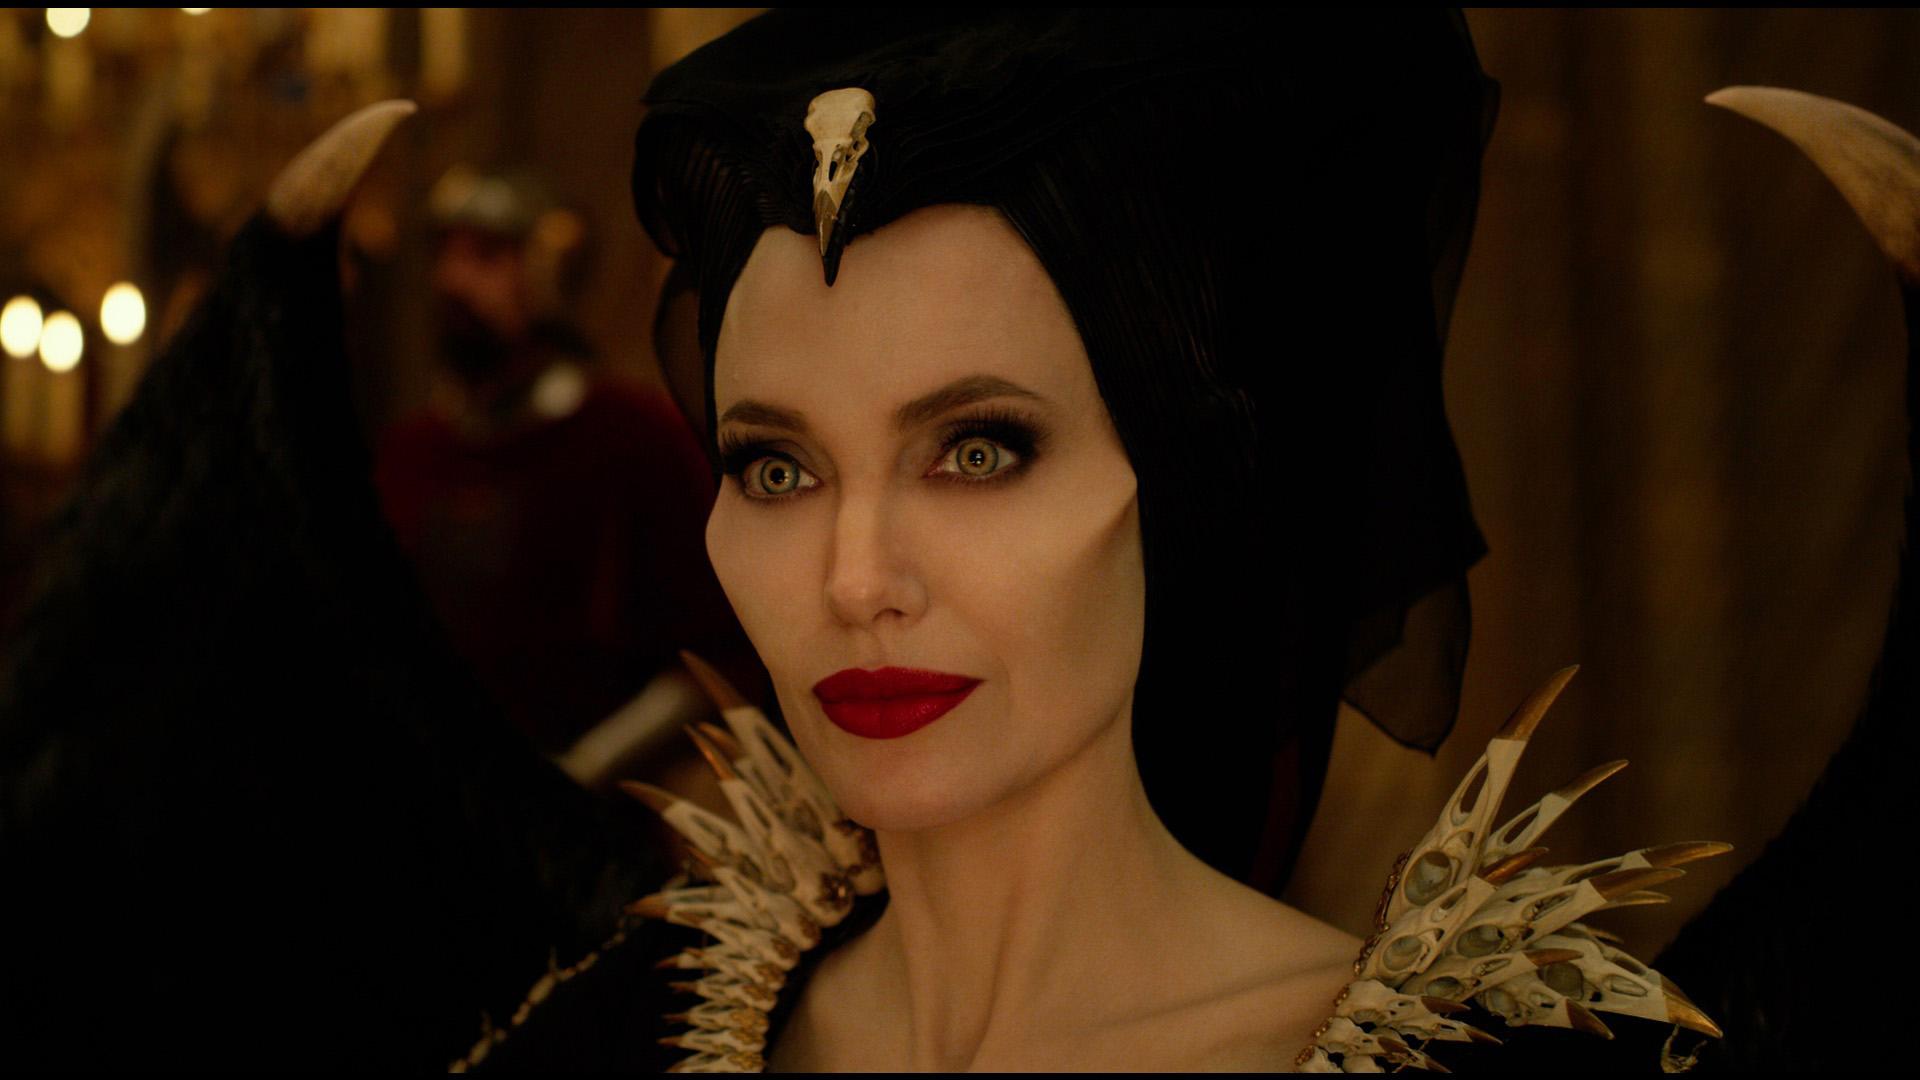 Angeline Jolie is done playing nice in Maleficent: Mistress